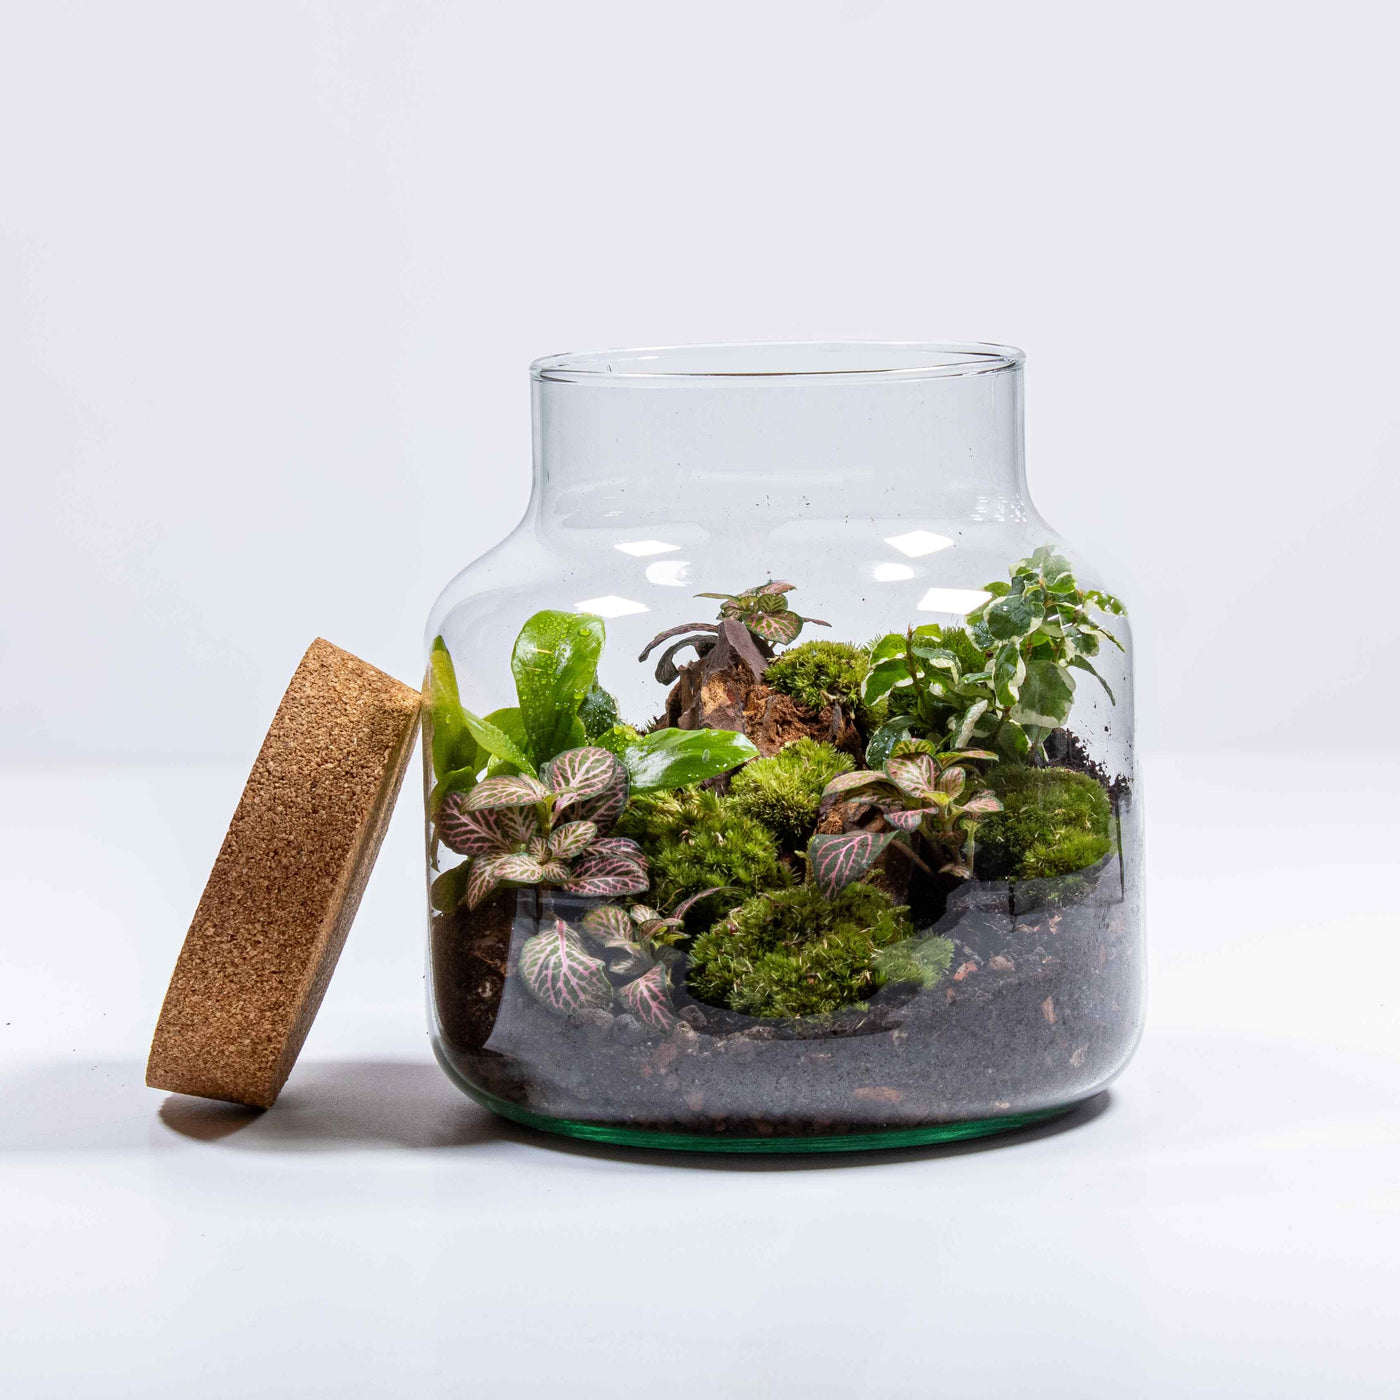 Craft your own green sanctuary with our classic terrarium kit, nestled in a charming glass container topped with a cork lid.